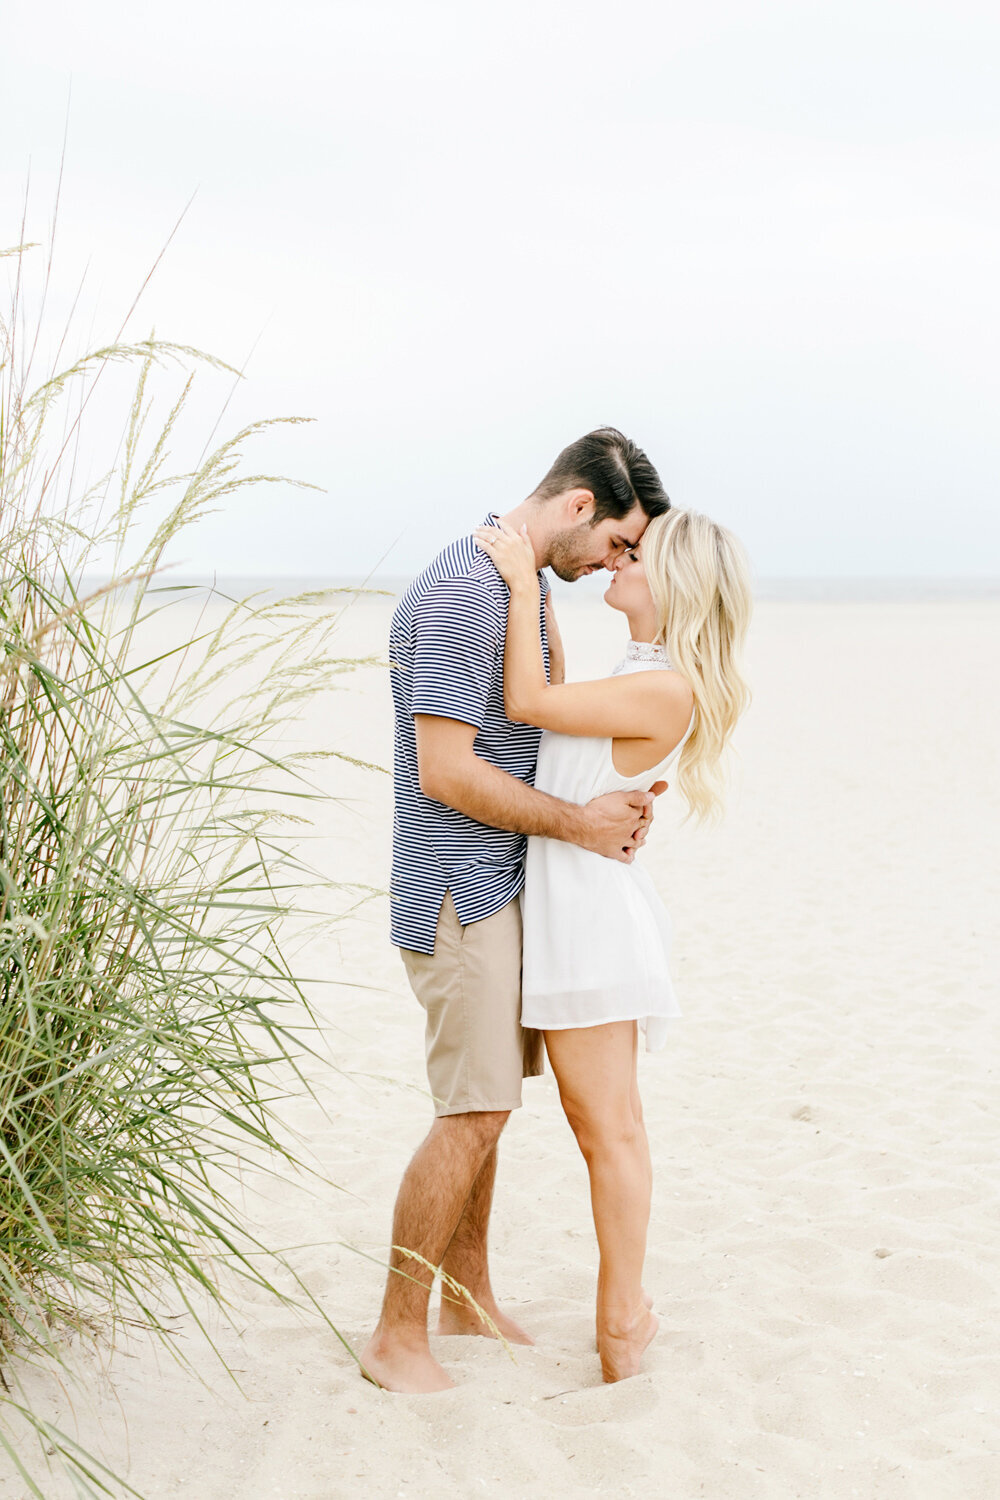 312-Emily-Wren-Photography-Beach-Engagement-Session